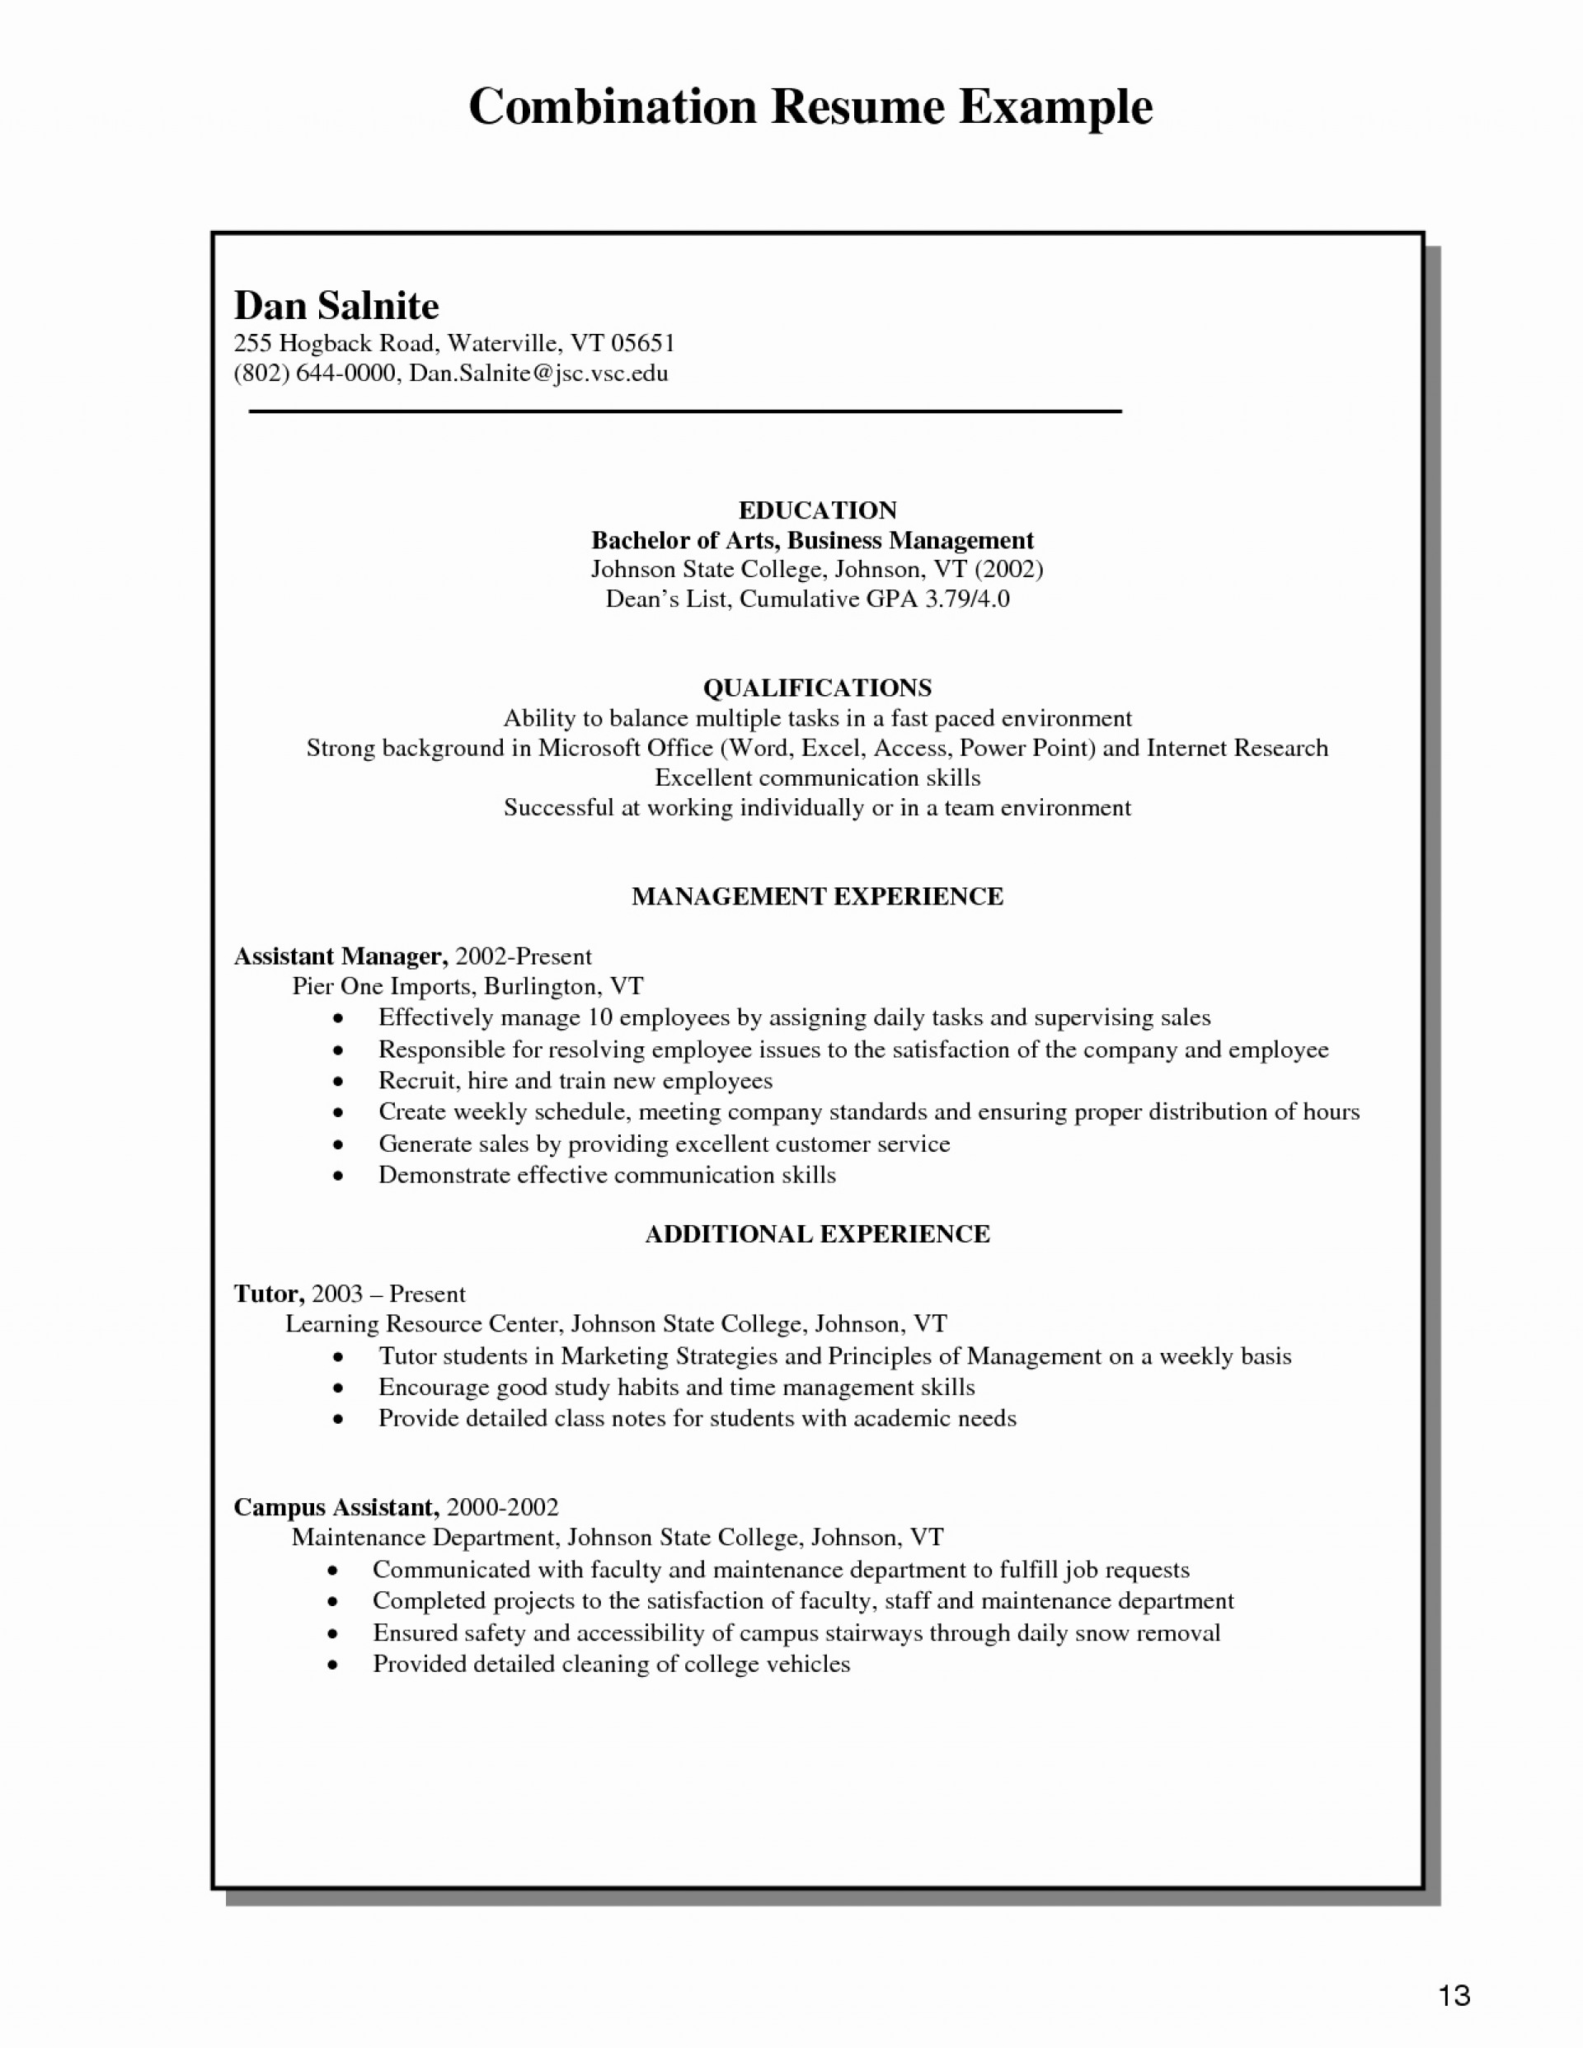 combination resume template free